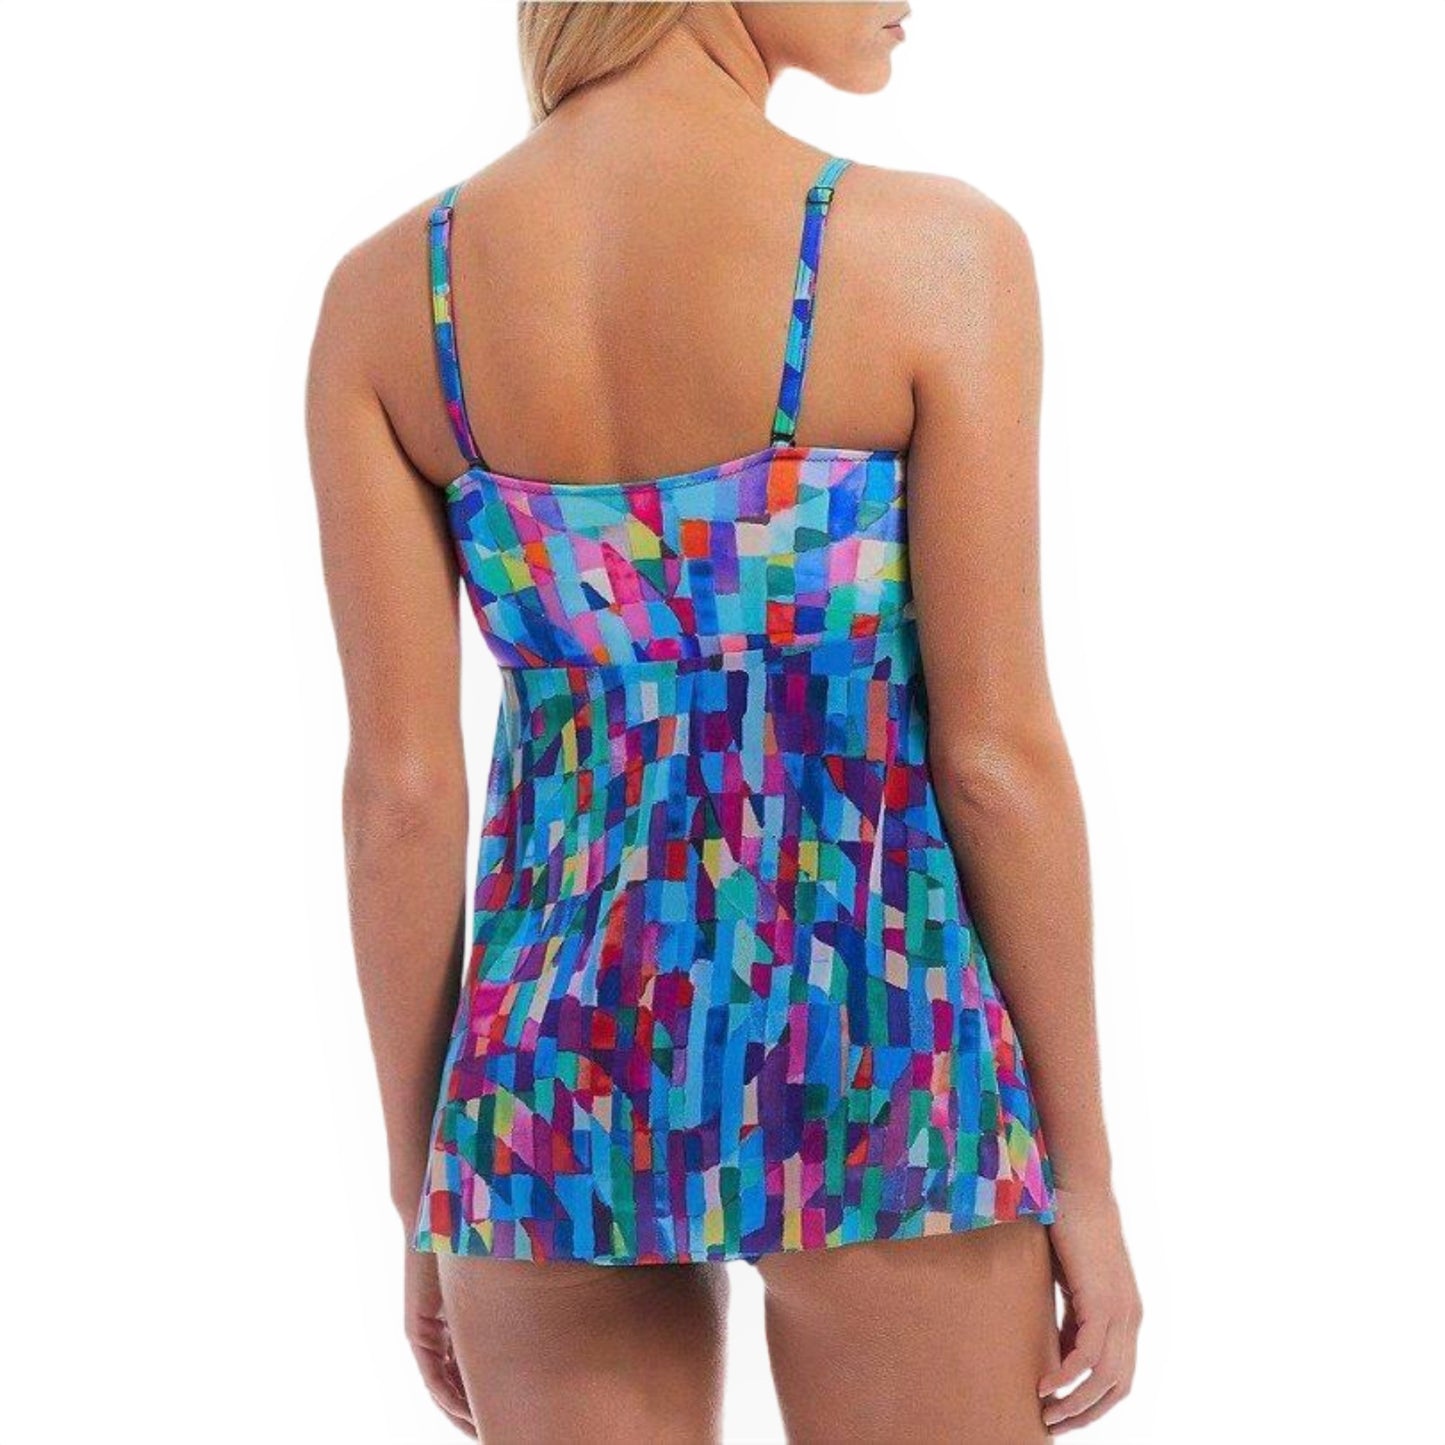 Profile by Gottex Women's Serendipity Fly Away One-piece Swimsuit Dress